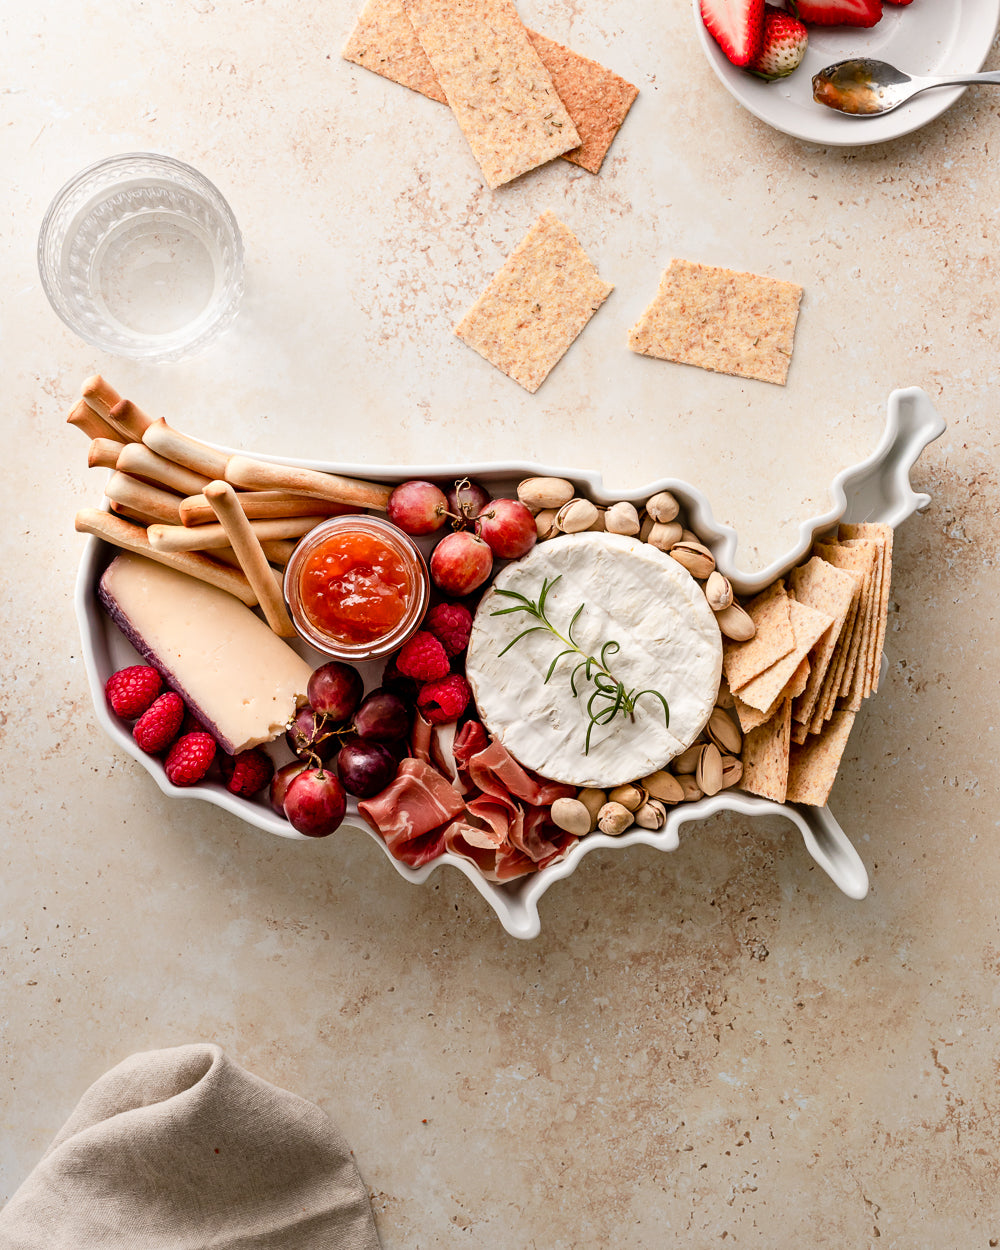 USA world plate with with appetizers. USA charcuterie board. USA charcuterie tray. USA meat and cheese board. USA tray appetizer. USA plate dessert. USA dessert tray. USA bakeware for dessert. United States of america baking dish. Ceramic USA tray. Ceramic USA bakeware. USA cooking gift. USA baking gift. USA kitchen gift.